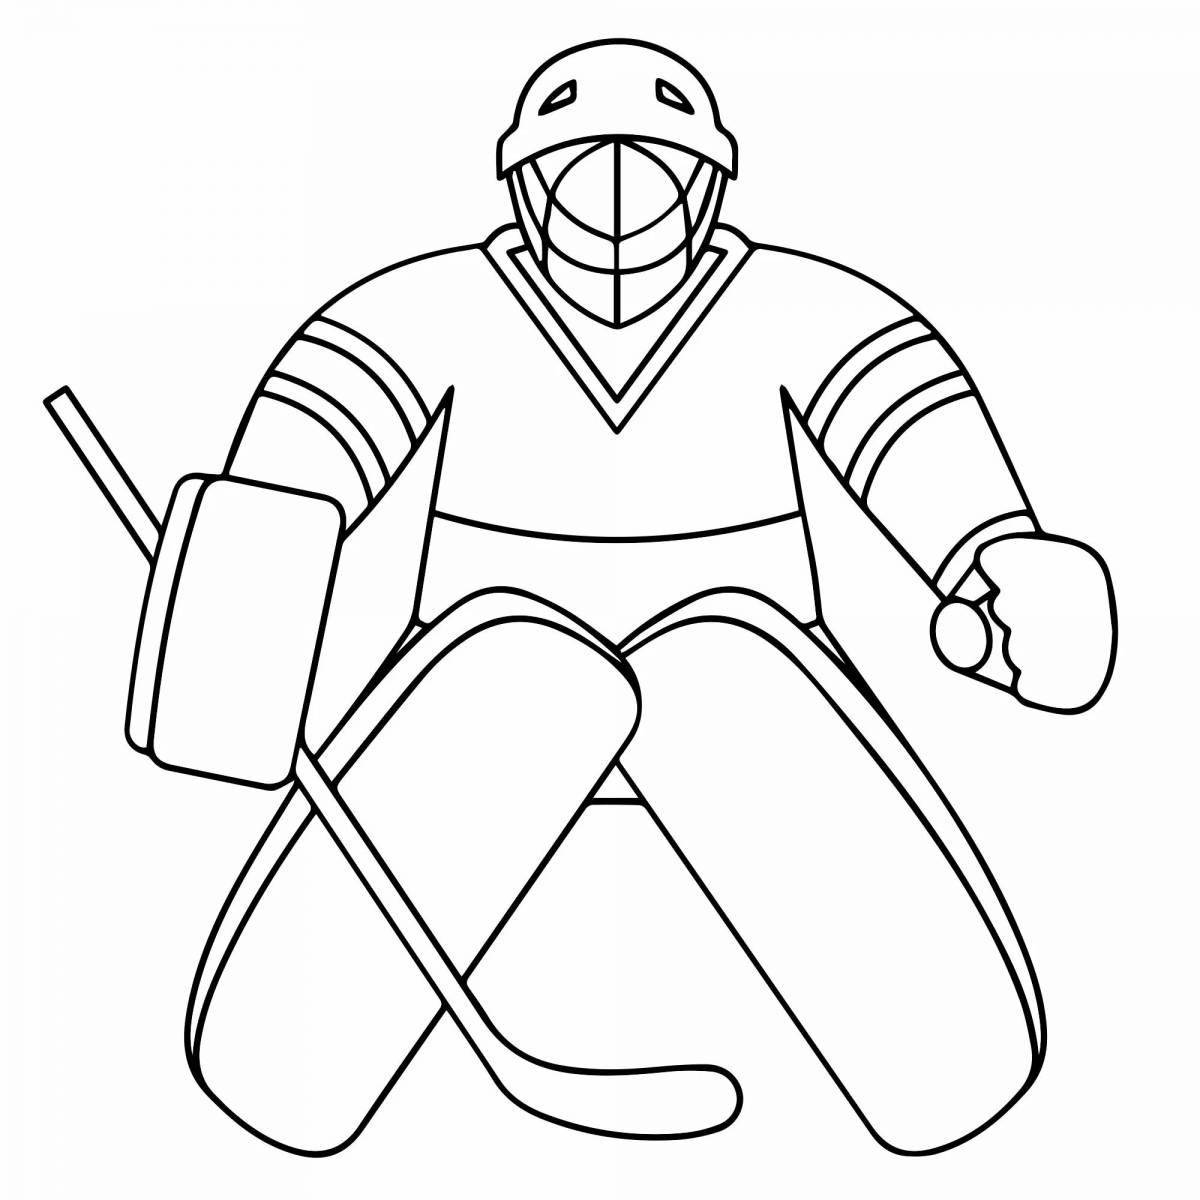 Coloring page for a mesmerizing hockey goalie